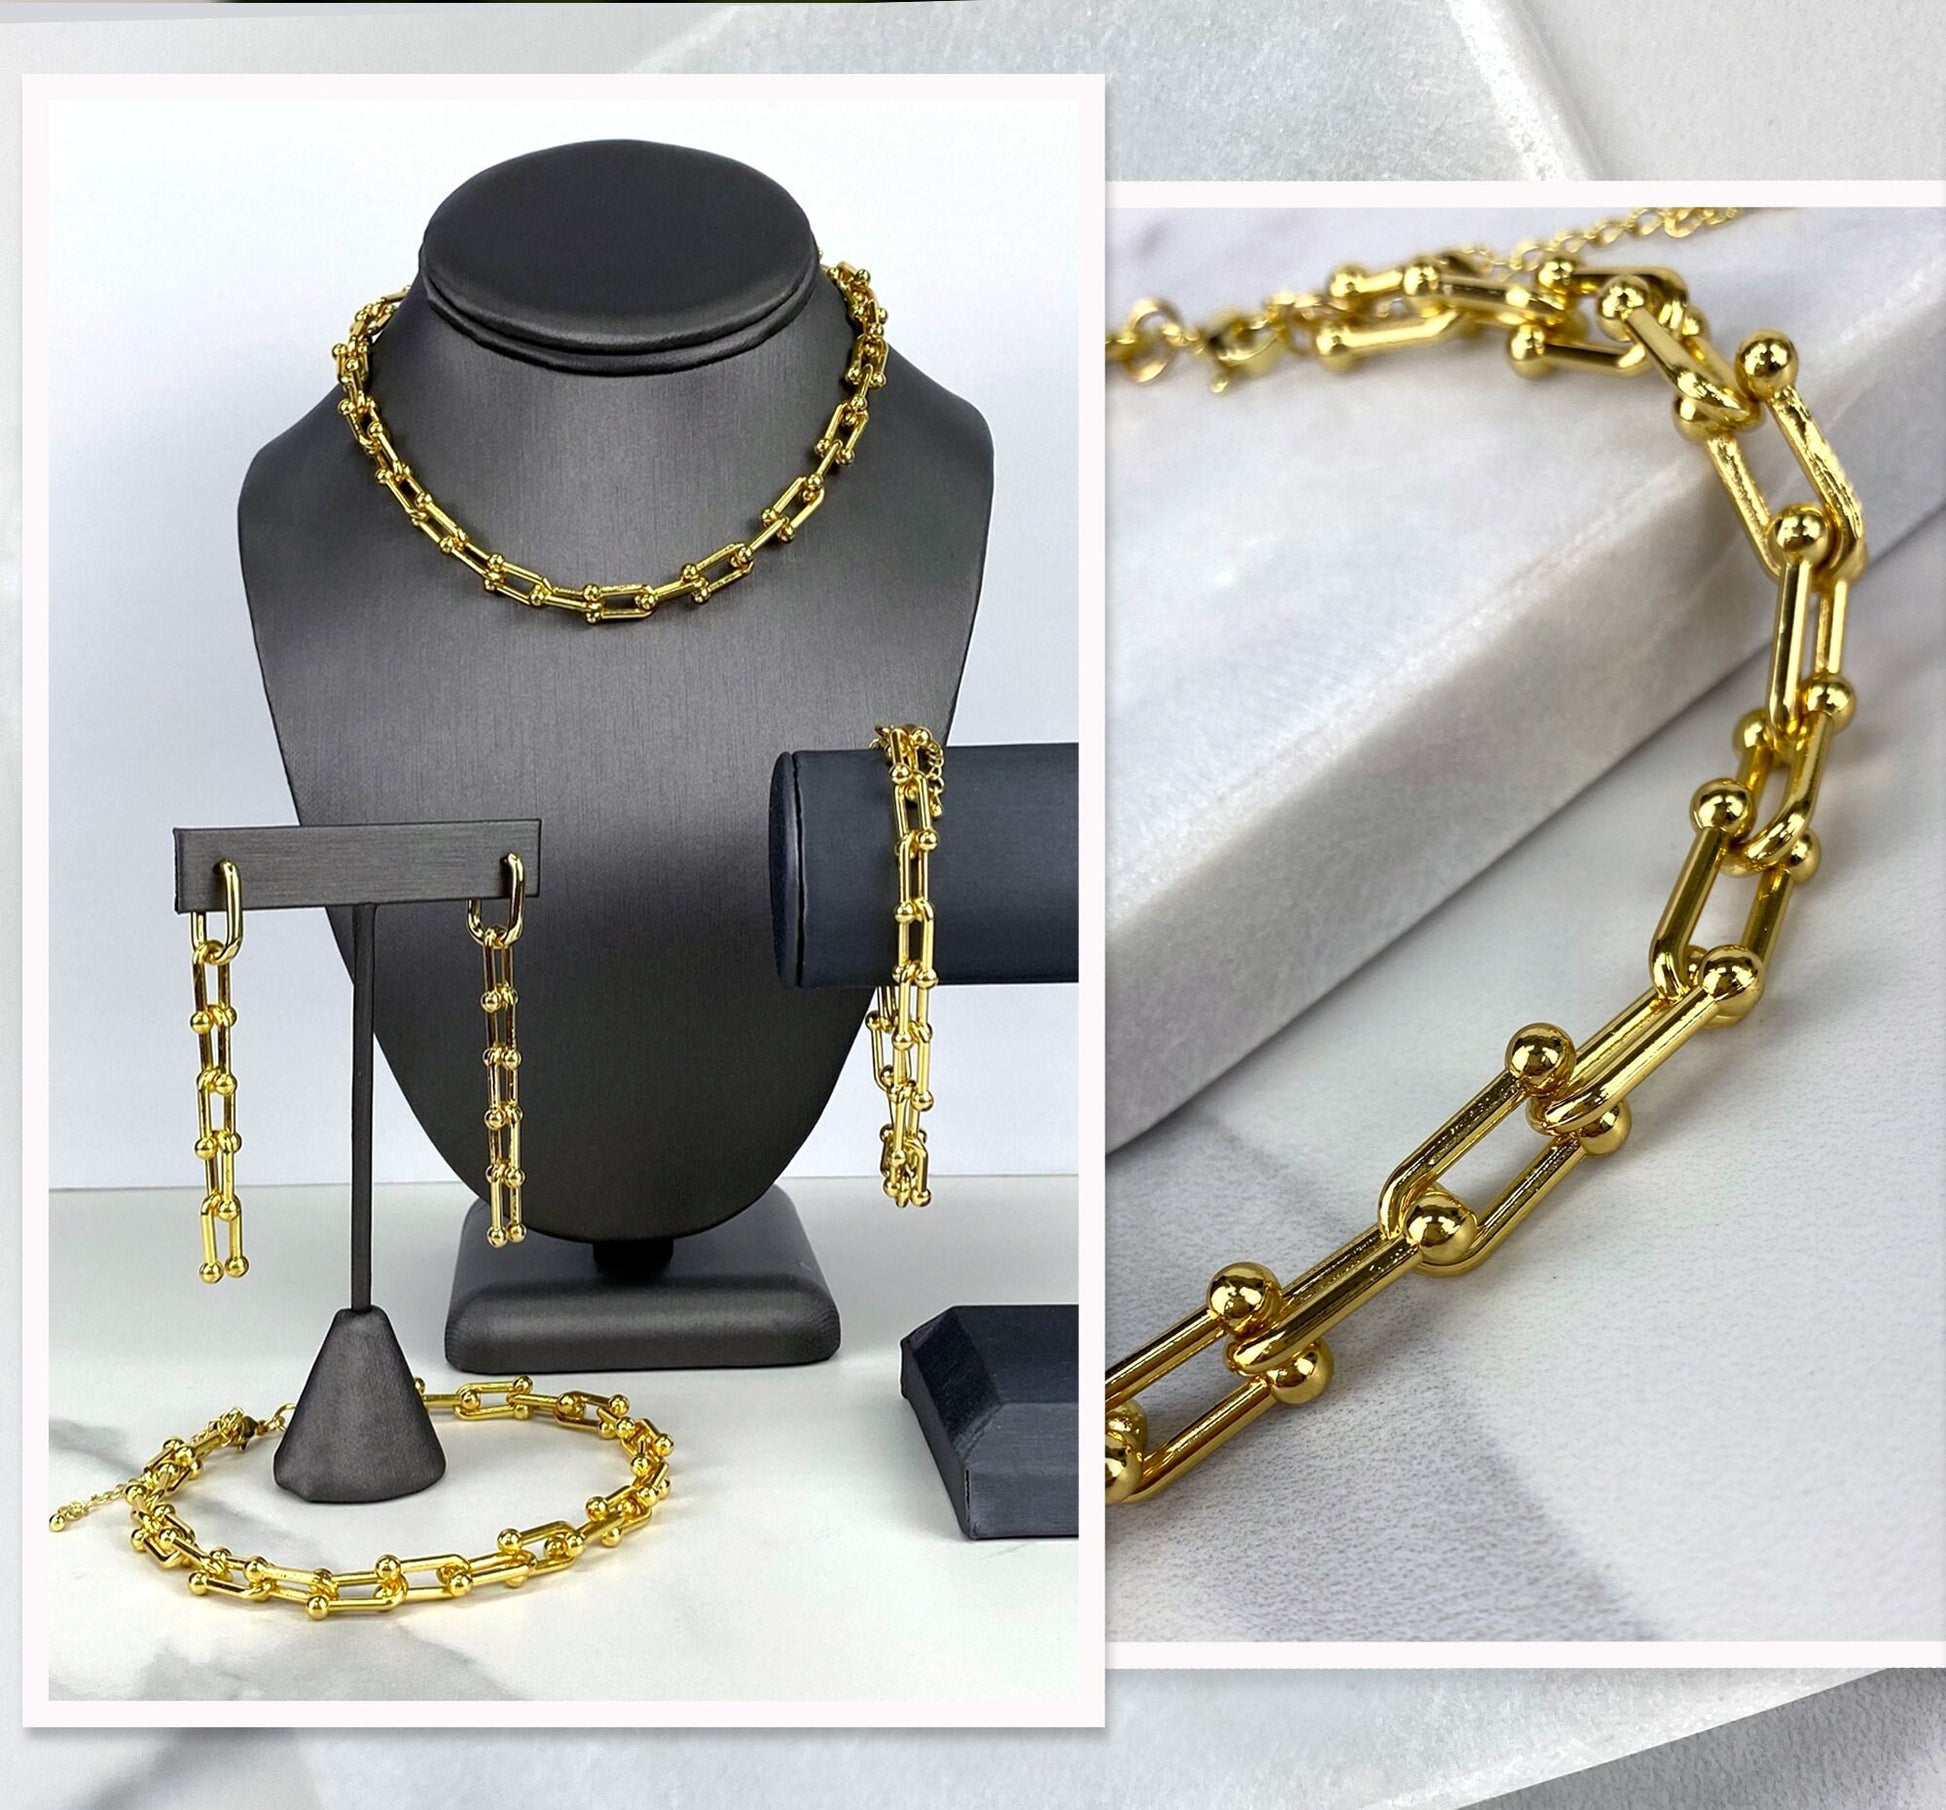 18k Gold Filled U Link Necklace 16 or 18 inches, Bracelet 7 or 8 inches and Anklet 11 inches, Wholesale Jewelry Supplies